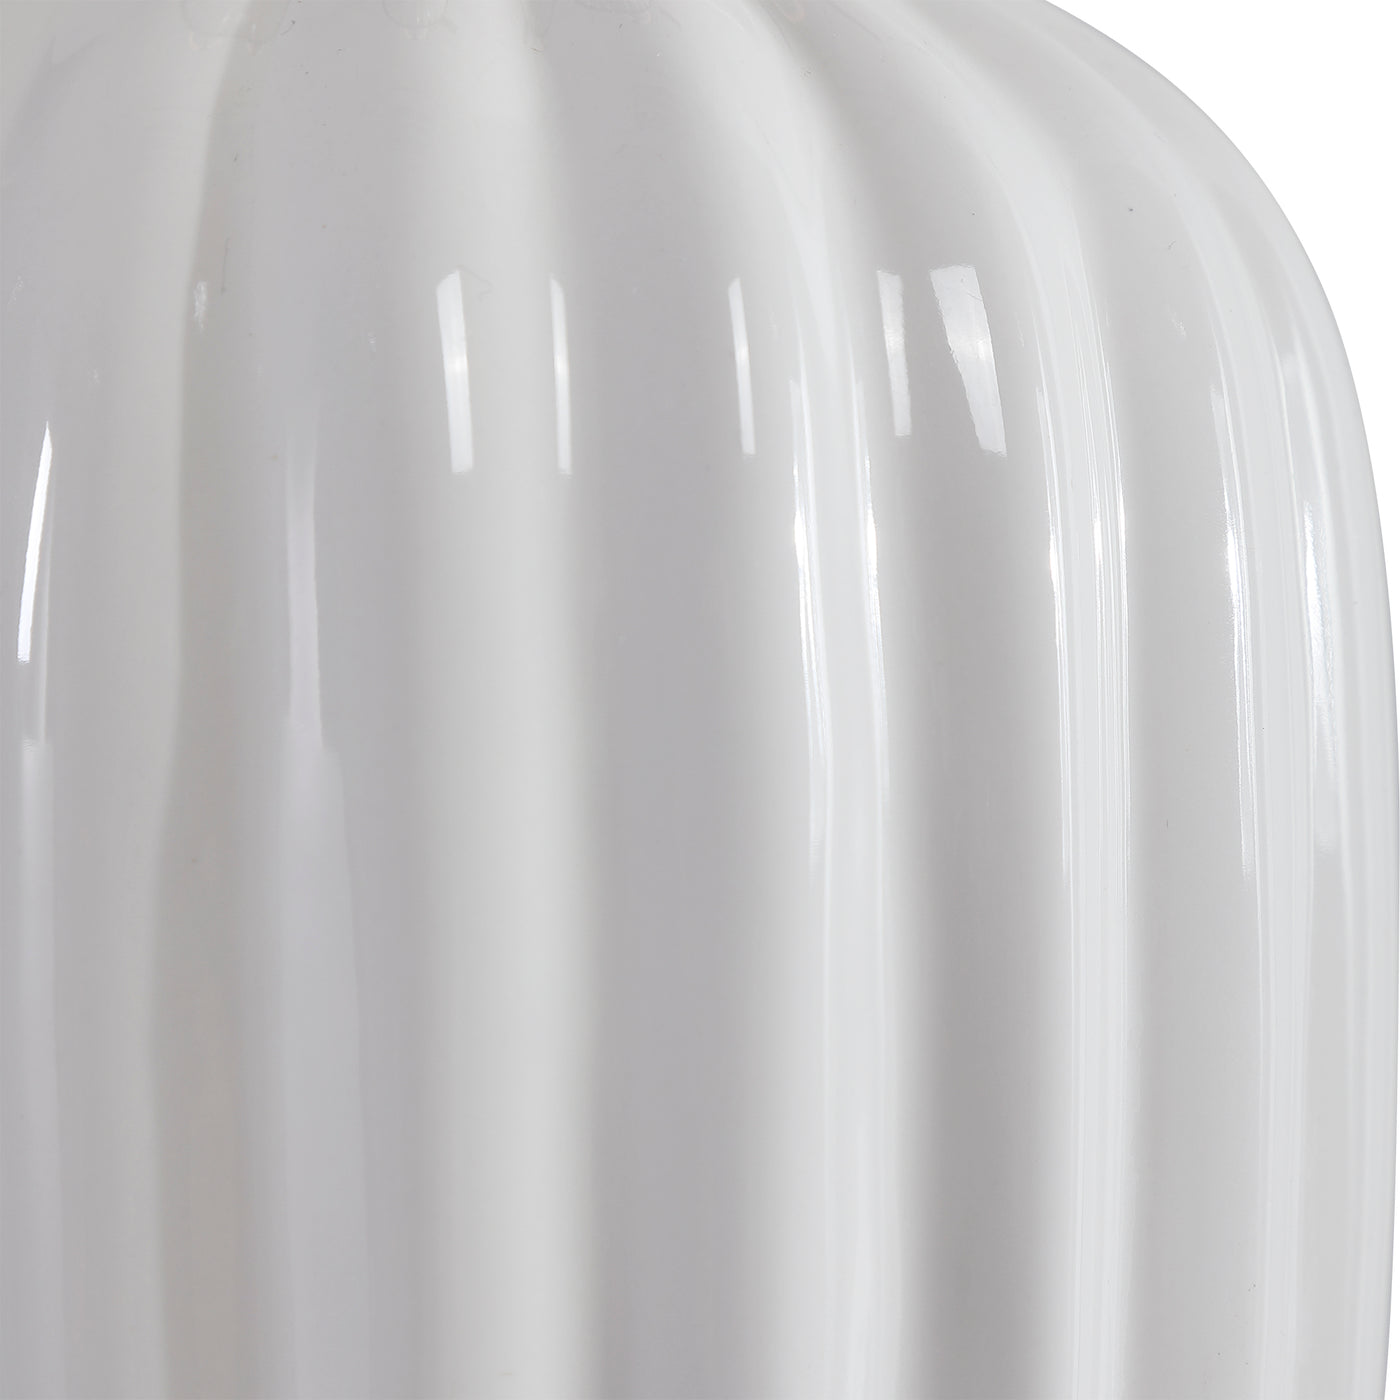 Displaying A Traditional Elegance, This Table Lamp Features A Fluted Ceramic Base In A Gloss White Glaze With Brushed Bras...